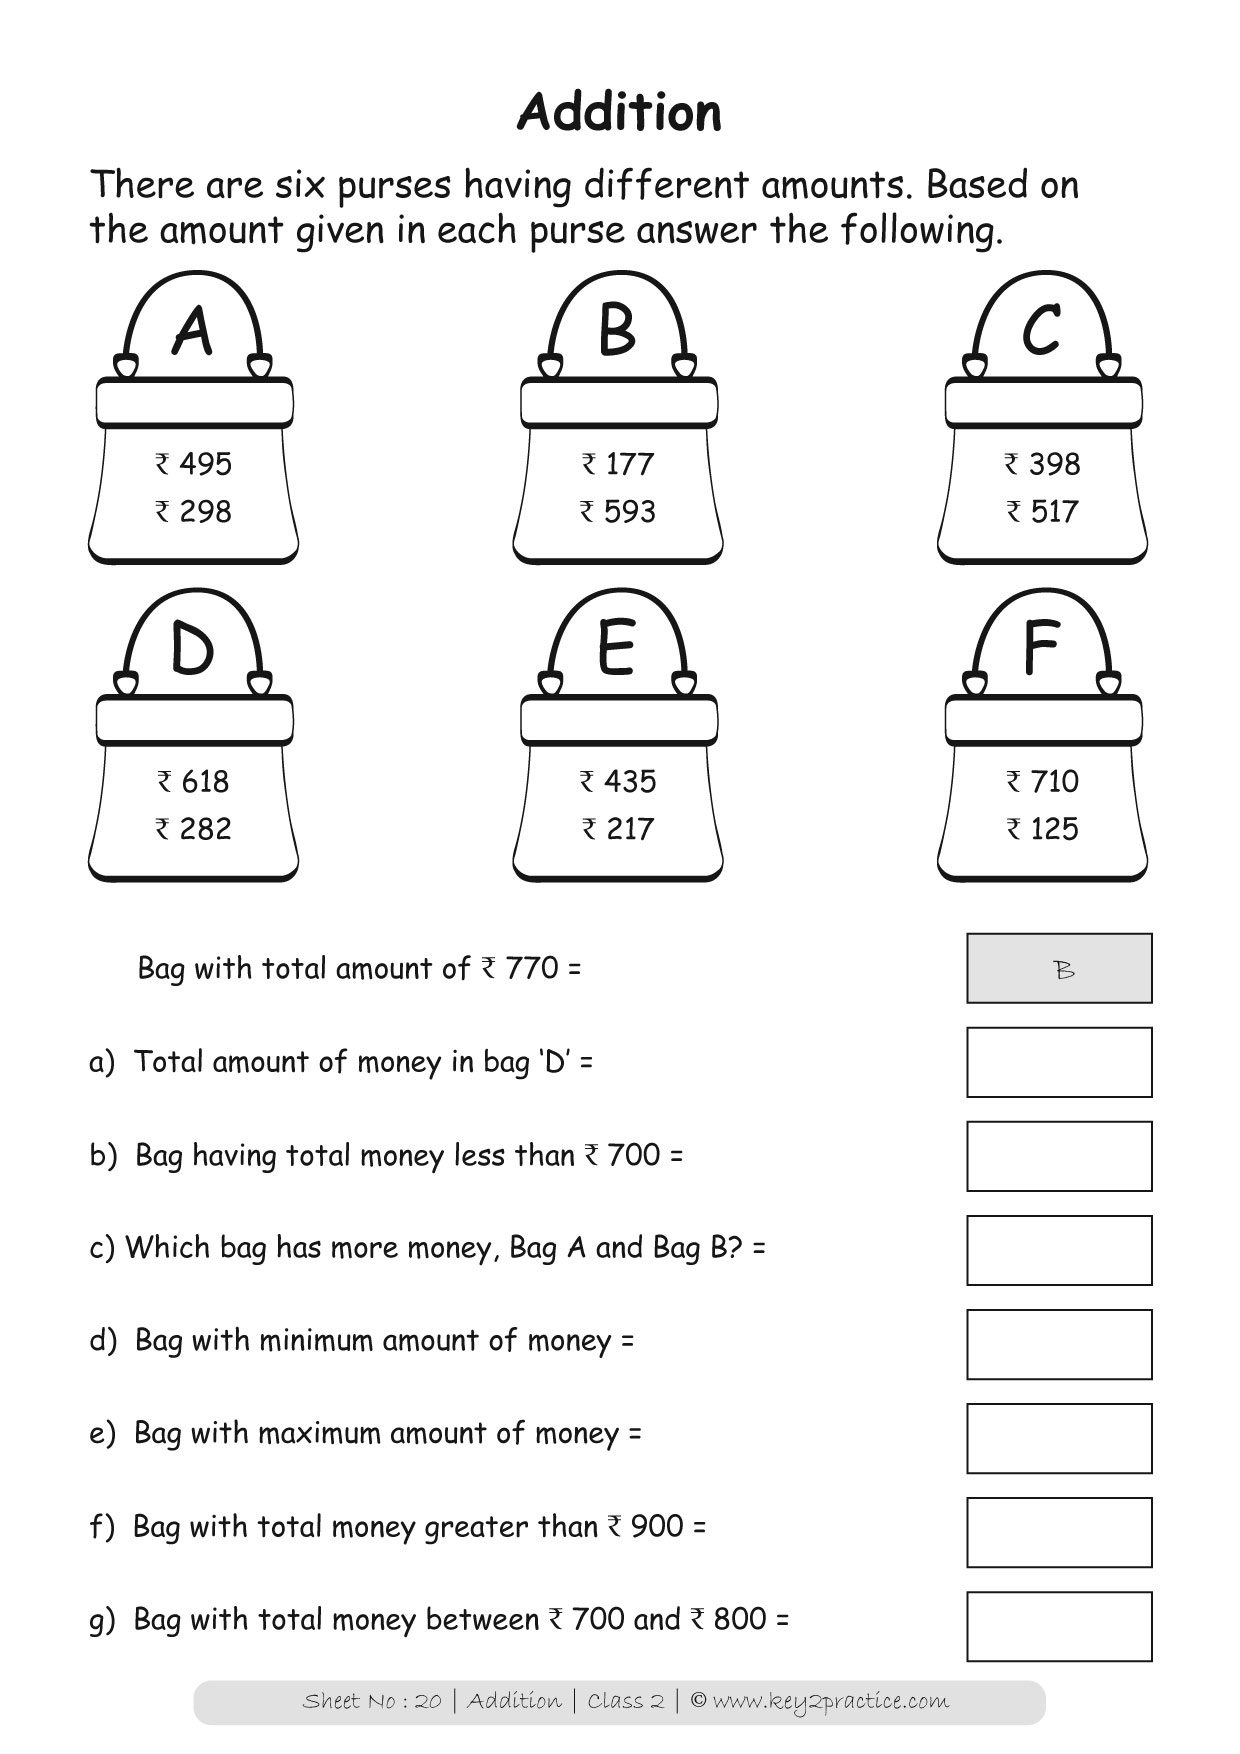 addition-to-20-practice-addition-worksheets-for-fact-fluency-practice-addition-worksheets